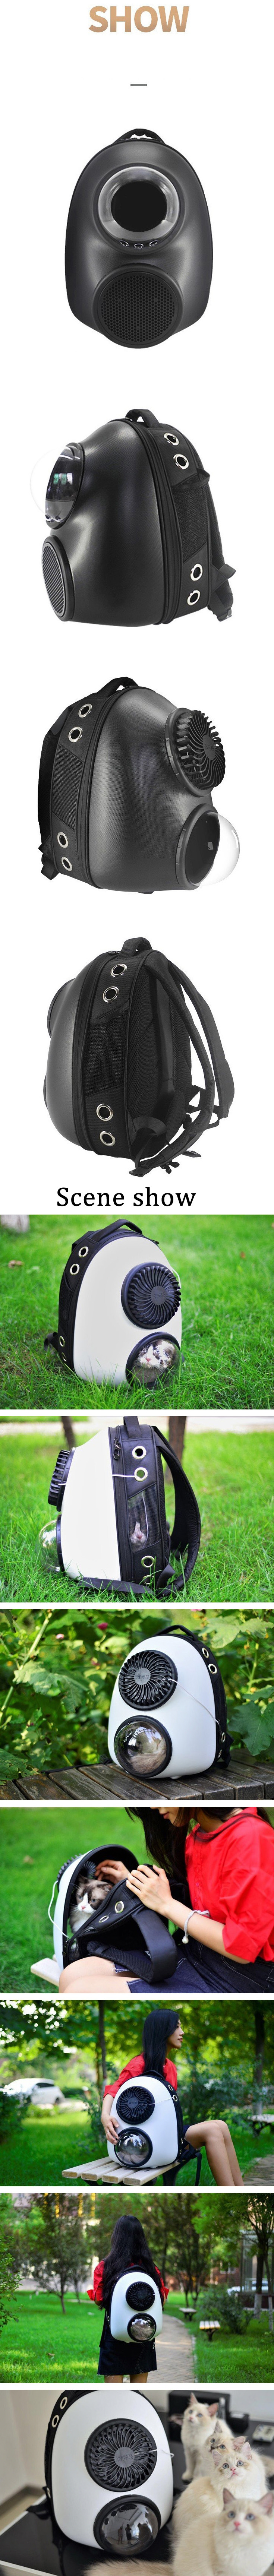 ABS-Pet-Fan-Astronaut-Capsule-Backpack-Portable-Outdoor-Pet-Bag-Breathable-for-Cat-Dog-1521330-2